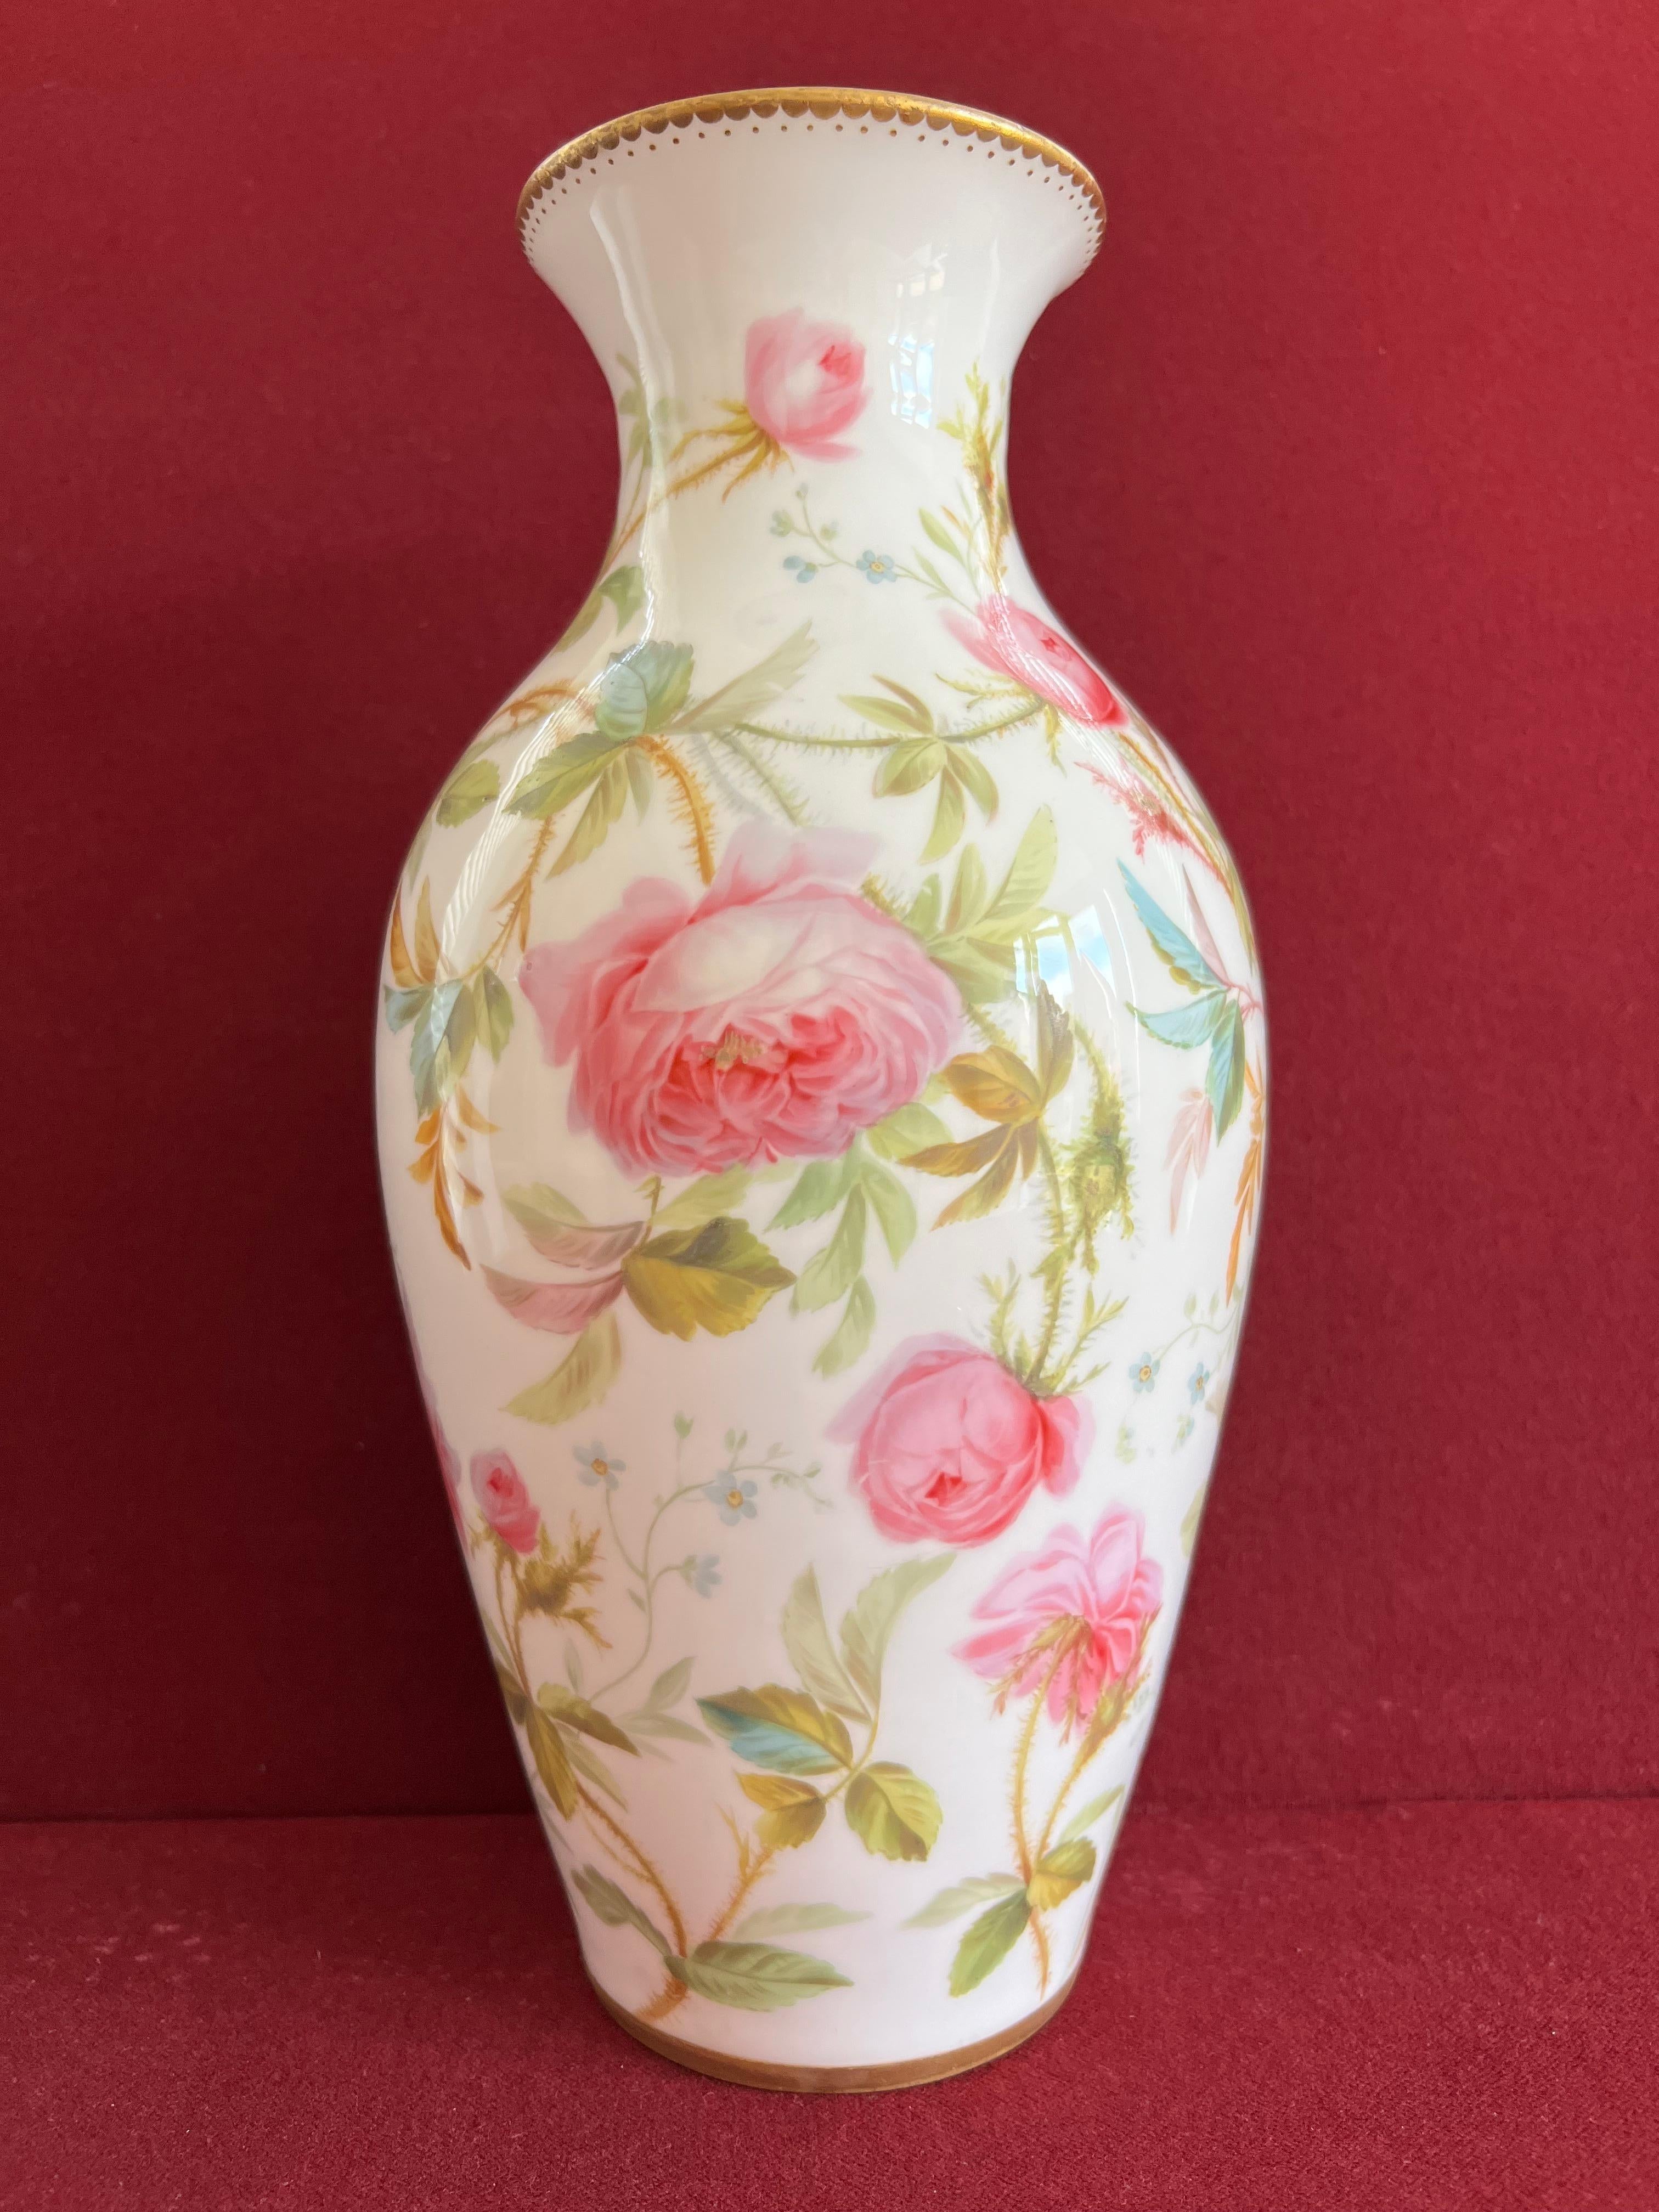 Hand-Painted Wonderful Minton Bone China Vase Decorated by Jessie Smith C.1850 For Sale